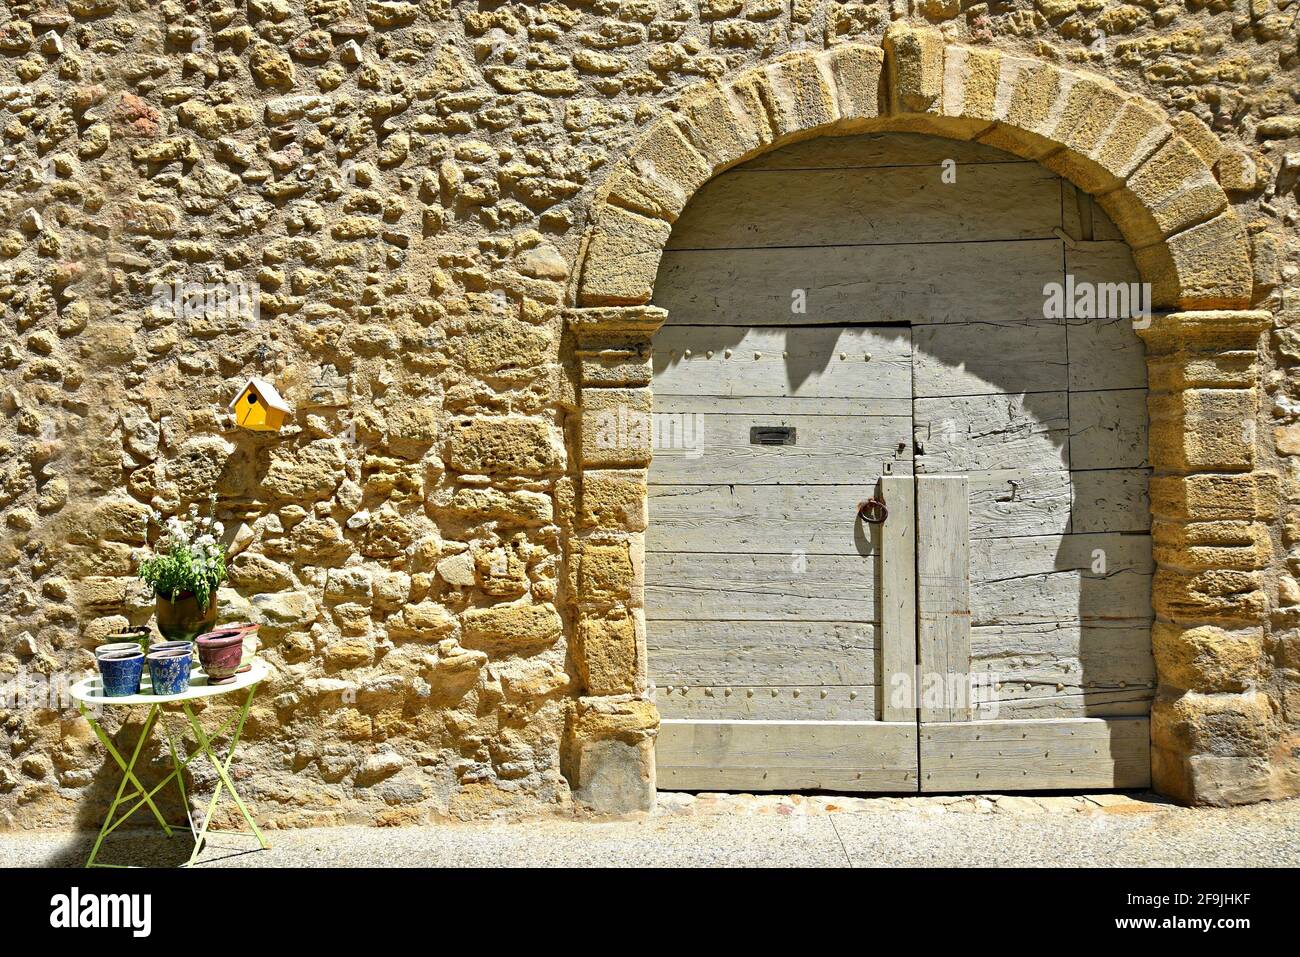 Provençal style house facade with an arched antique wooden door on a stone wall in the picturesque village of Lourmarin in Vaucluse, Provence France. Stock Photo